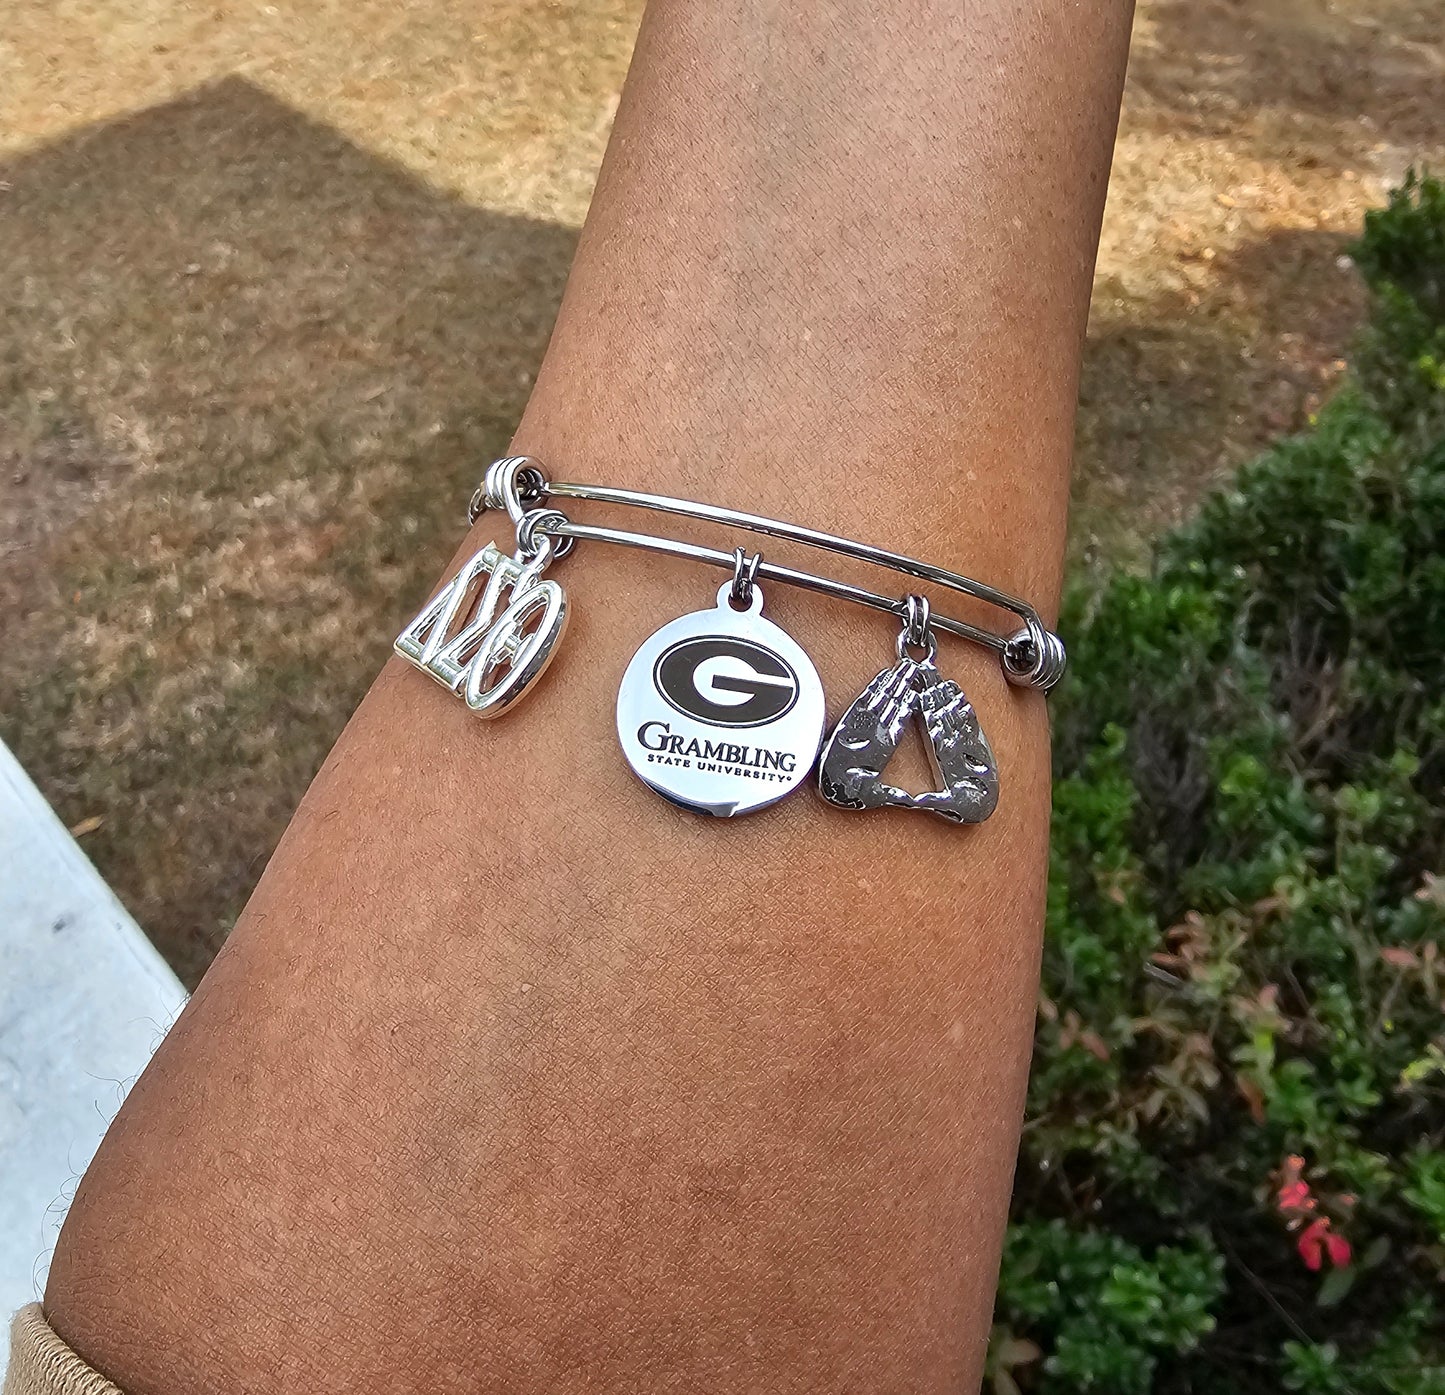 Grambling State University Bracelet Available In Gold and Silver